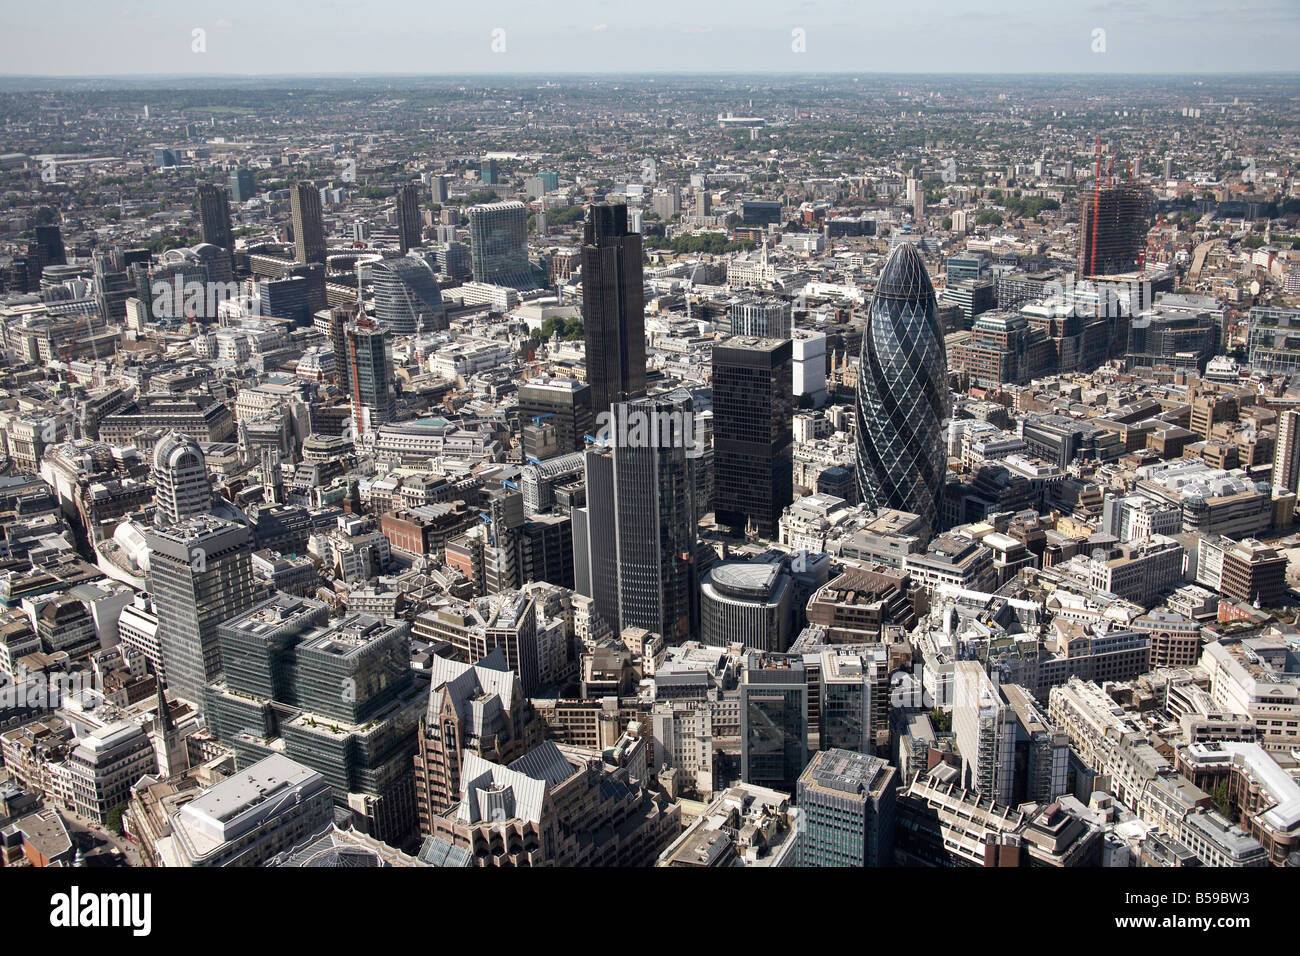 Aerial north west of inner city buildings tower blocks Gherkin Building 99 Bishopsgate The NatWest Tower The City of London EC3 Stock Photo